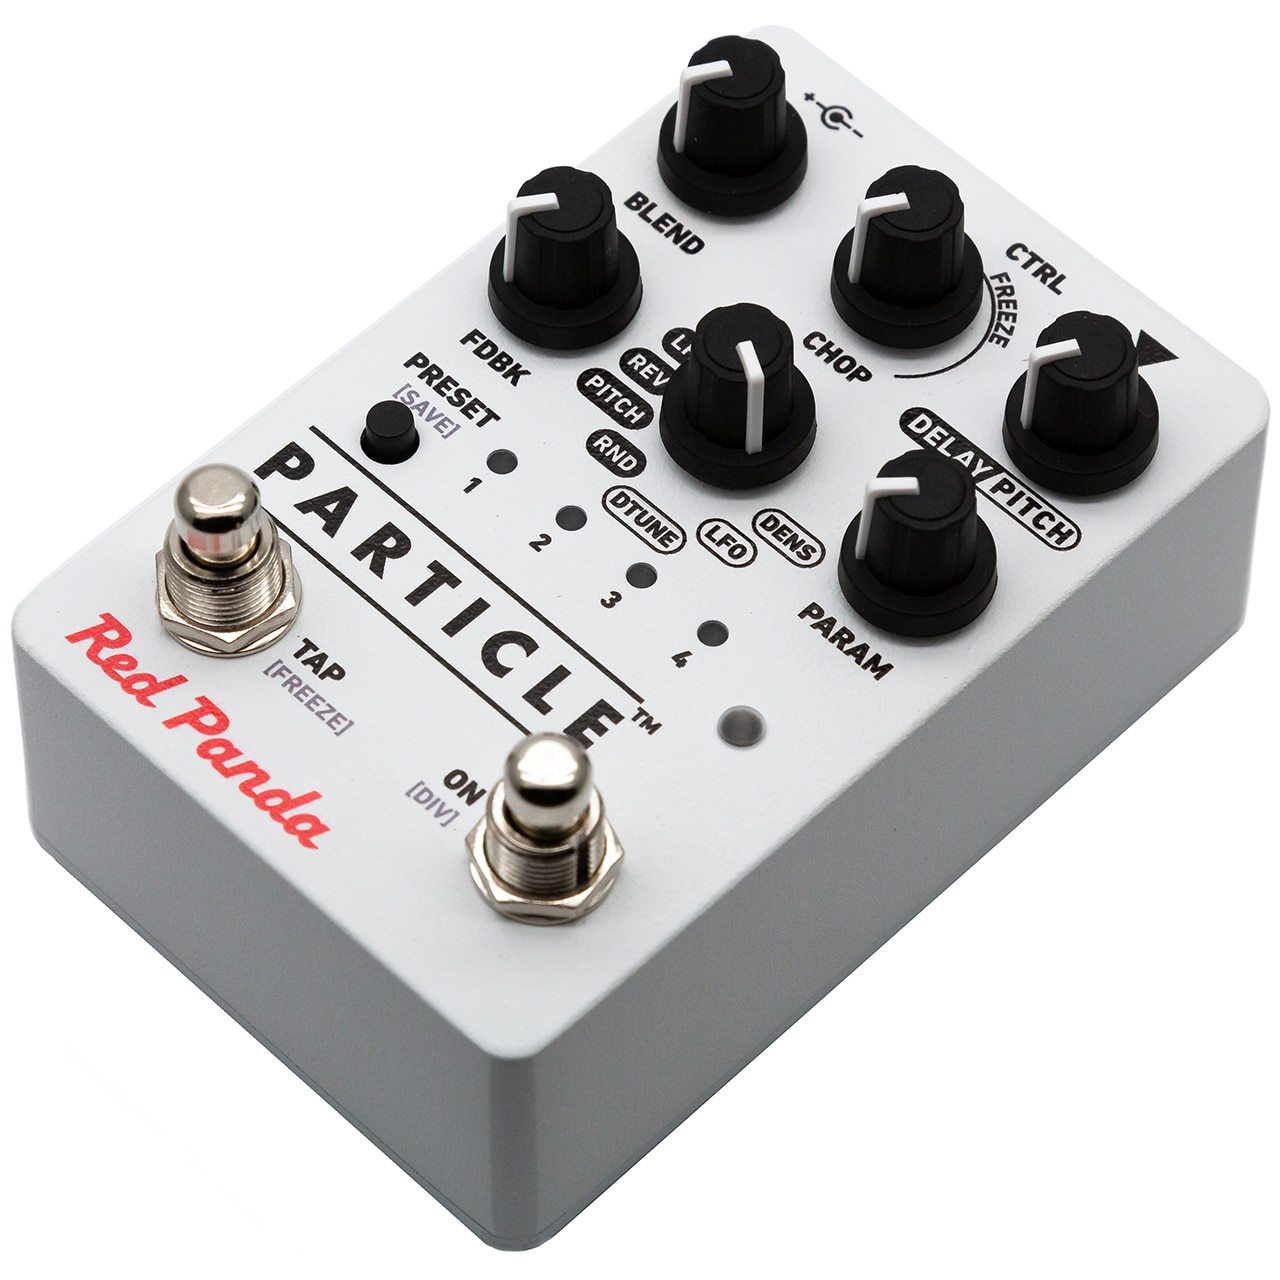 Red Panda Particle V2 - Reverb/delay/echo effect pedaal - Variation 1